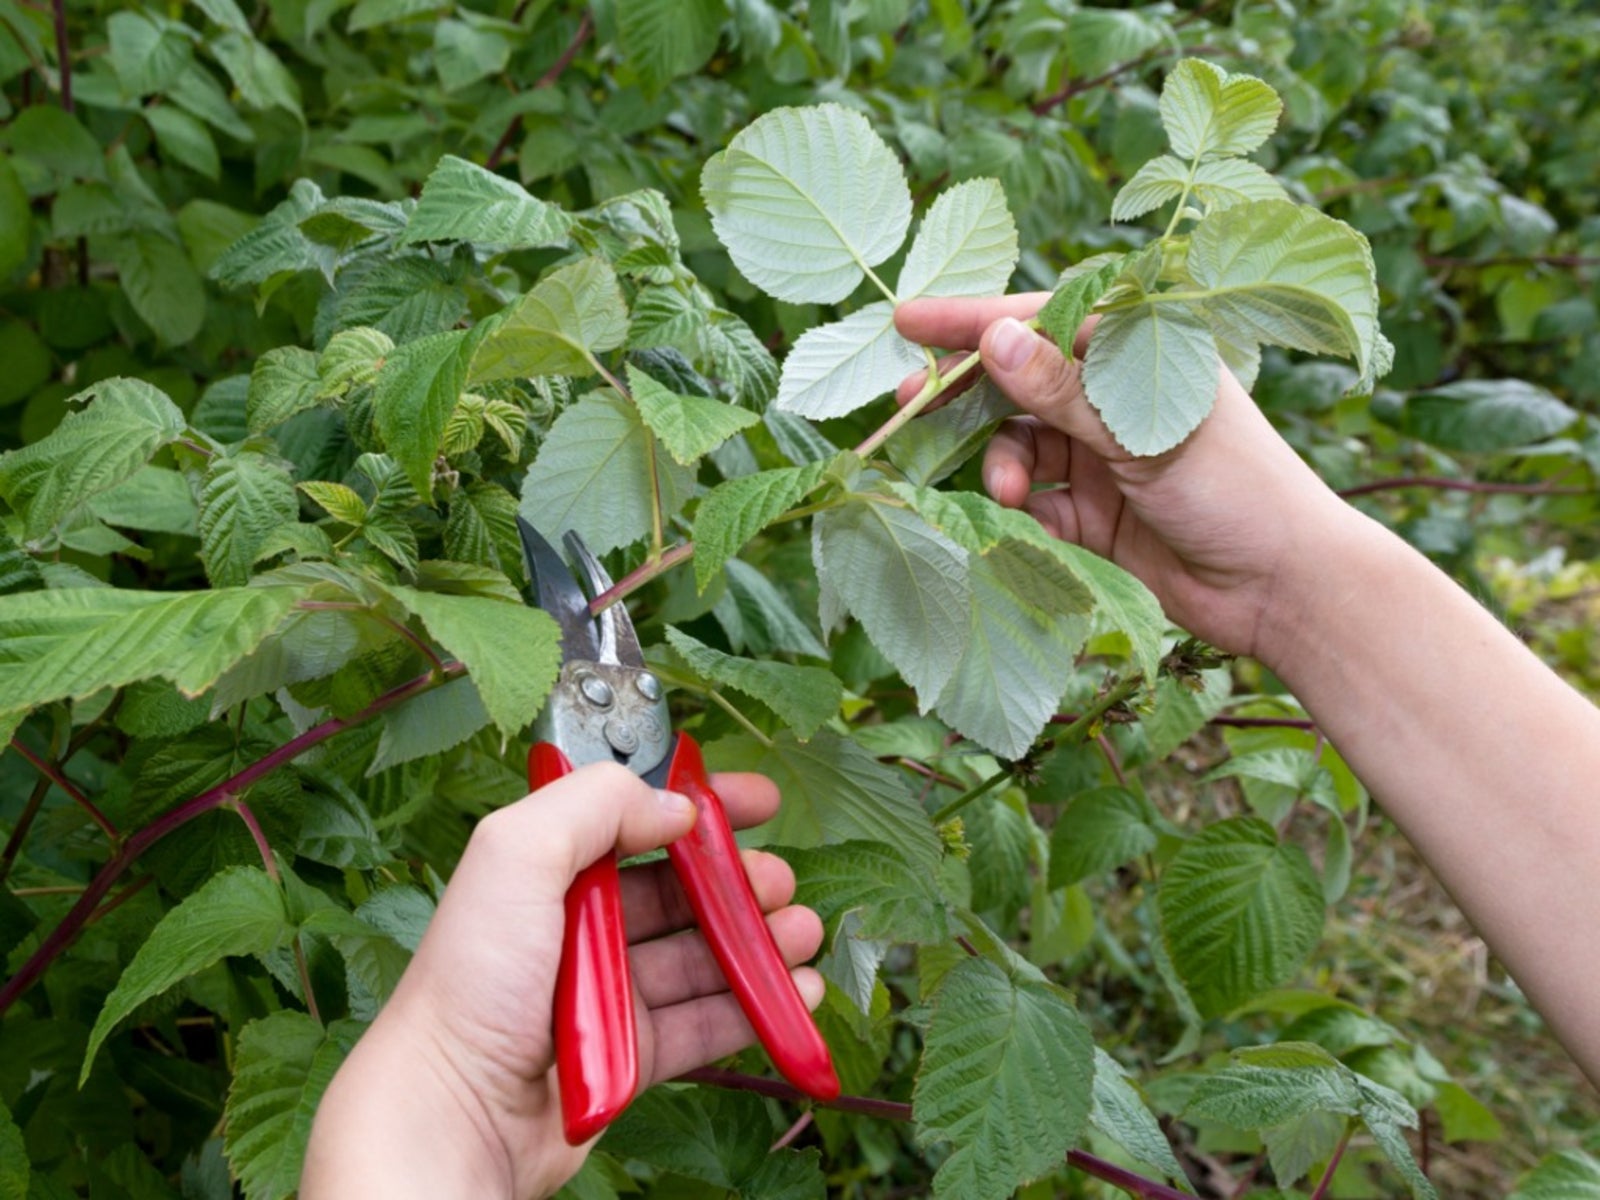 Pruning Your Raspberry Canes for Maximum Yield